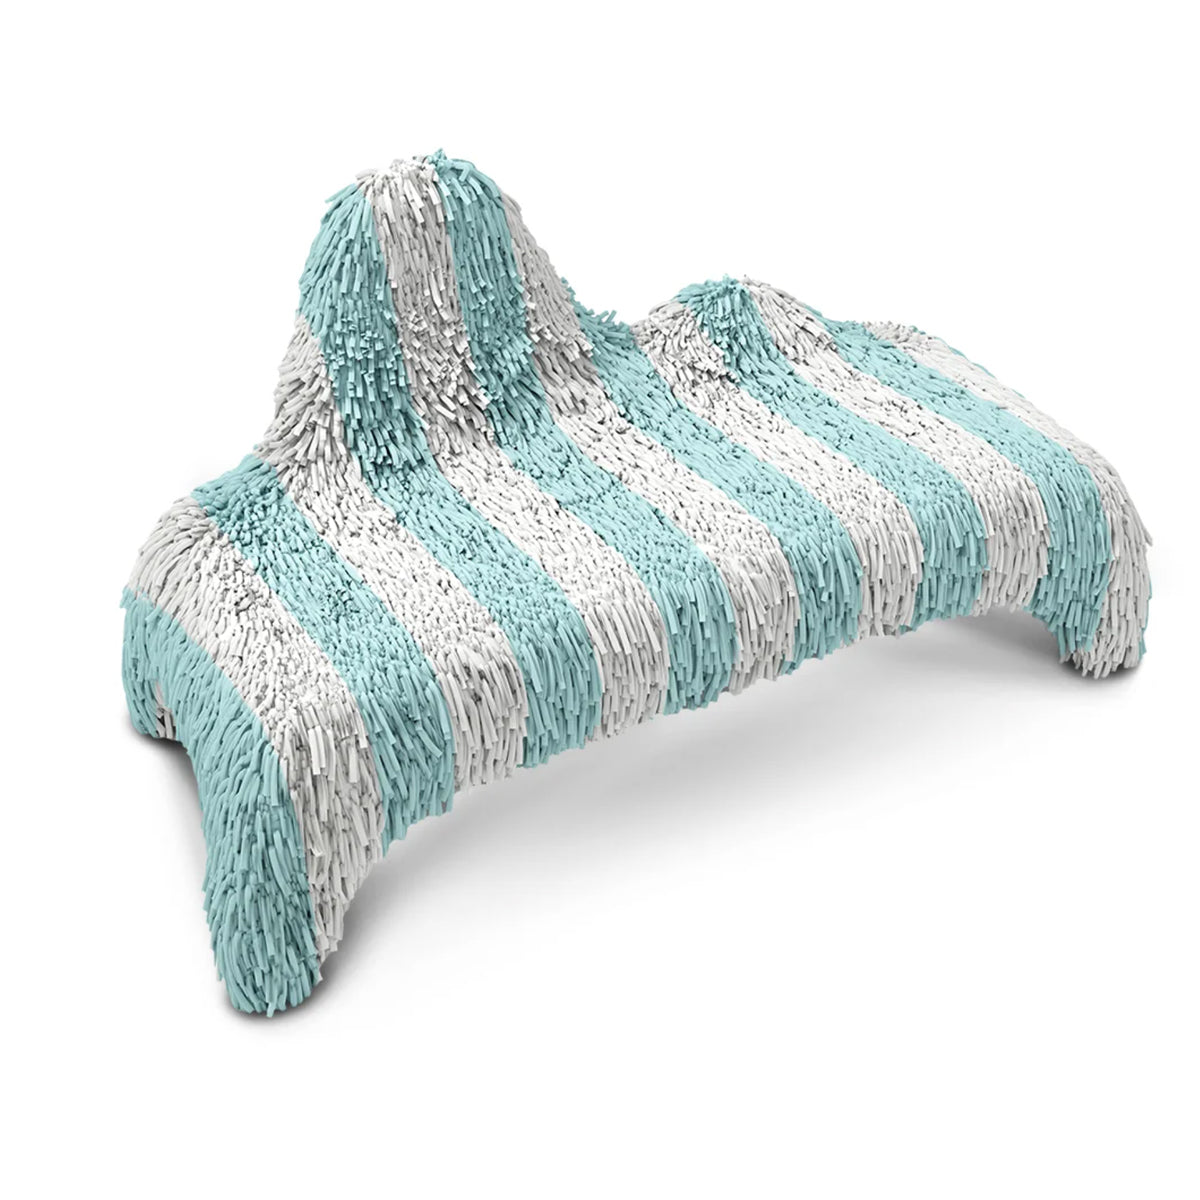 Animal Seat - Forest Collection by Scarlet Splendour | Do Shop